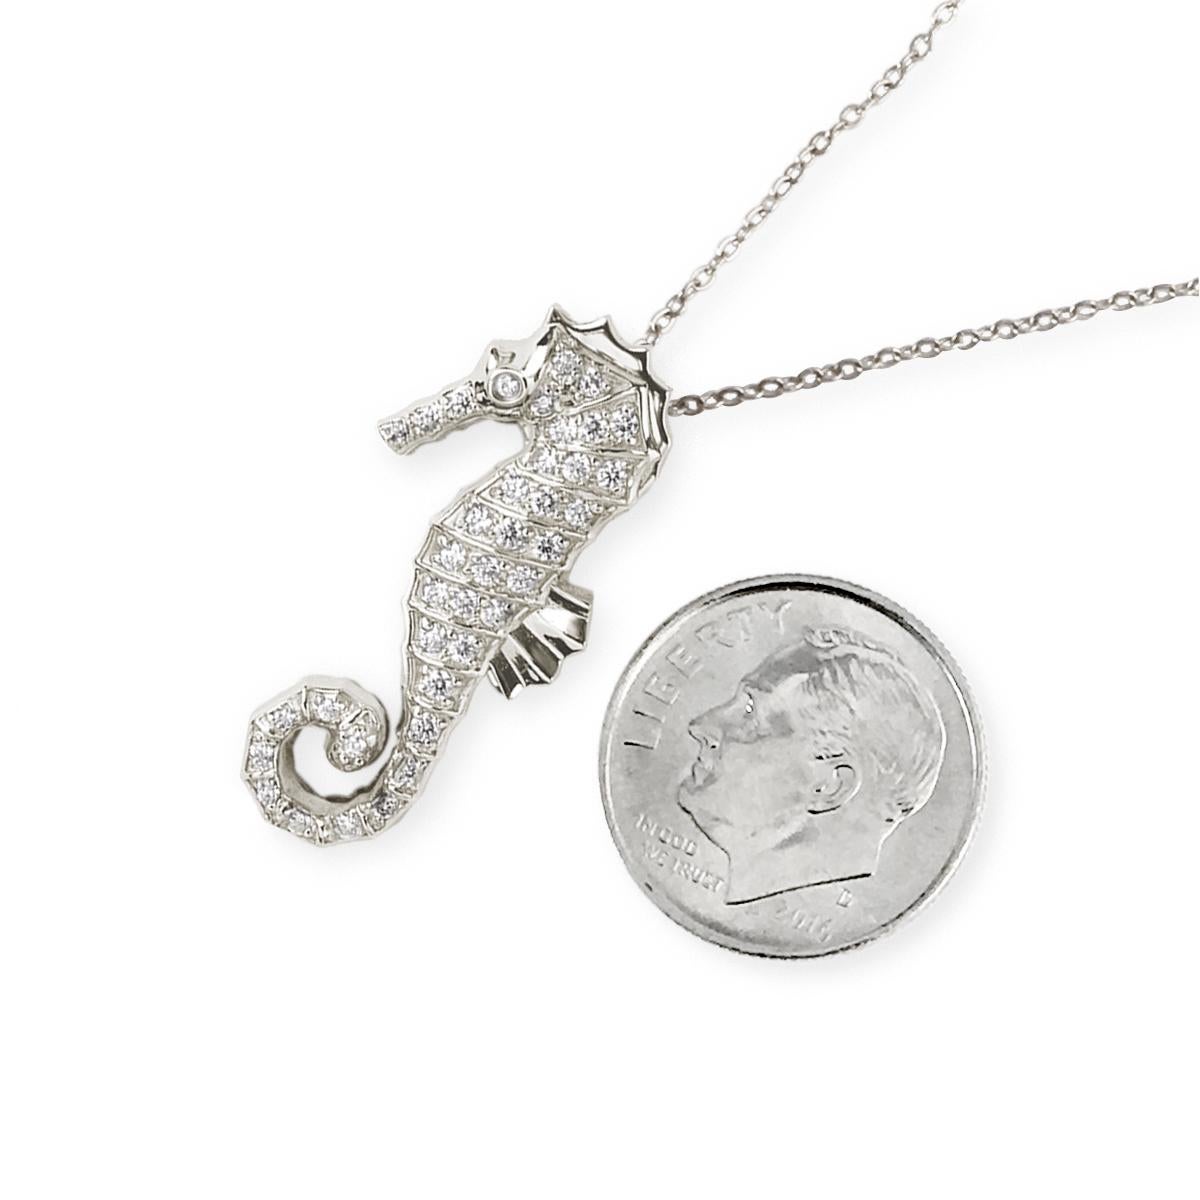 By Special Order only
Experience the enchantment of the sea with our Large Seahorse Diamond Pendant in White Gold. Crafted with meticulous attention to detail, this limited edition piece features 39 brilliant-cut round diamonds intricately pave set